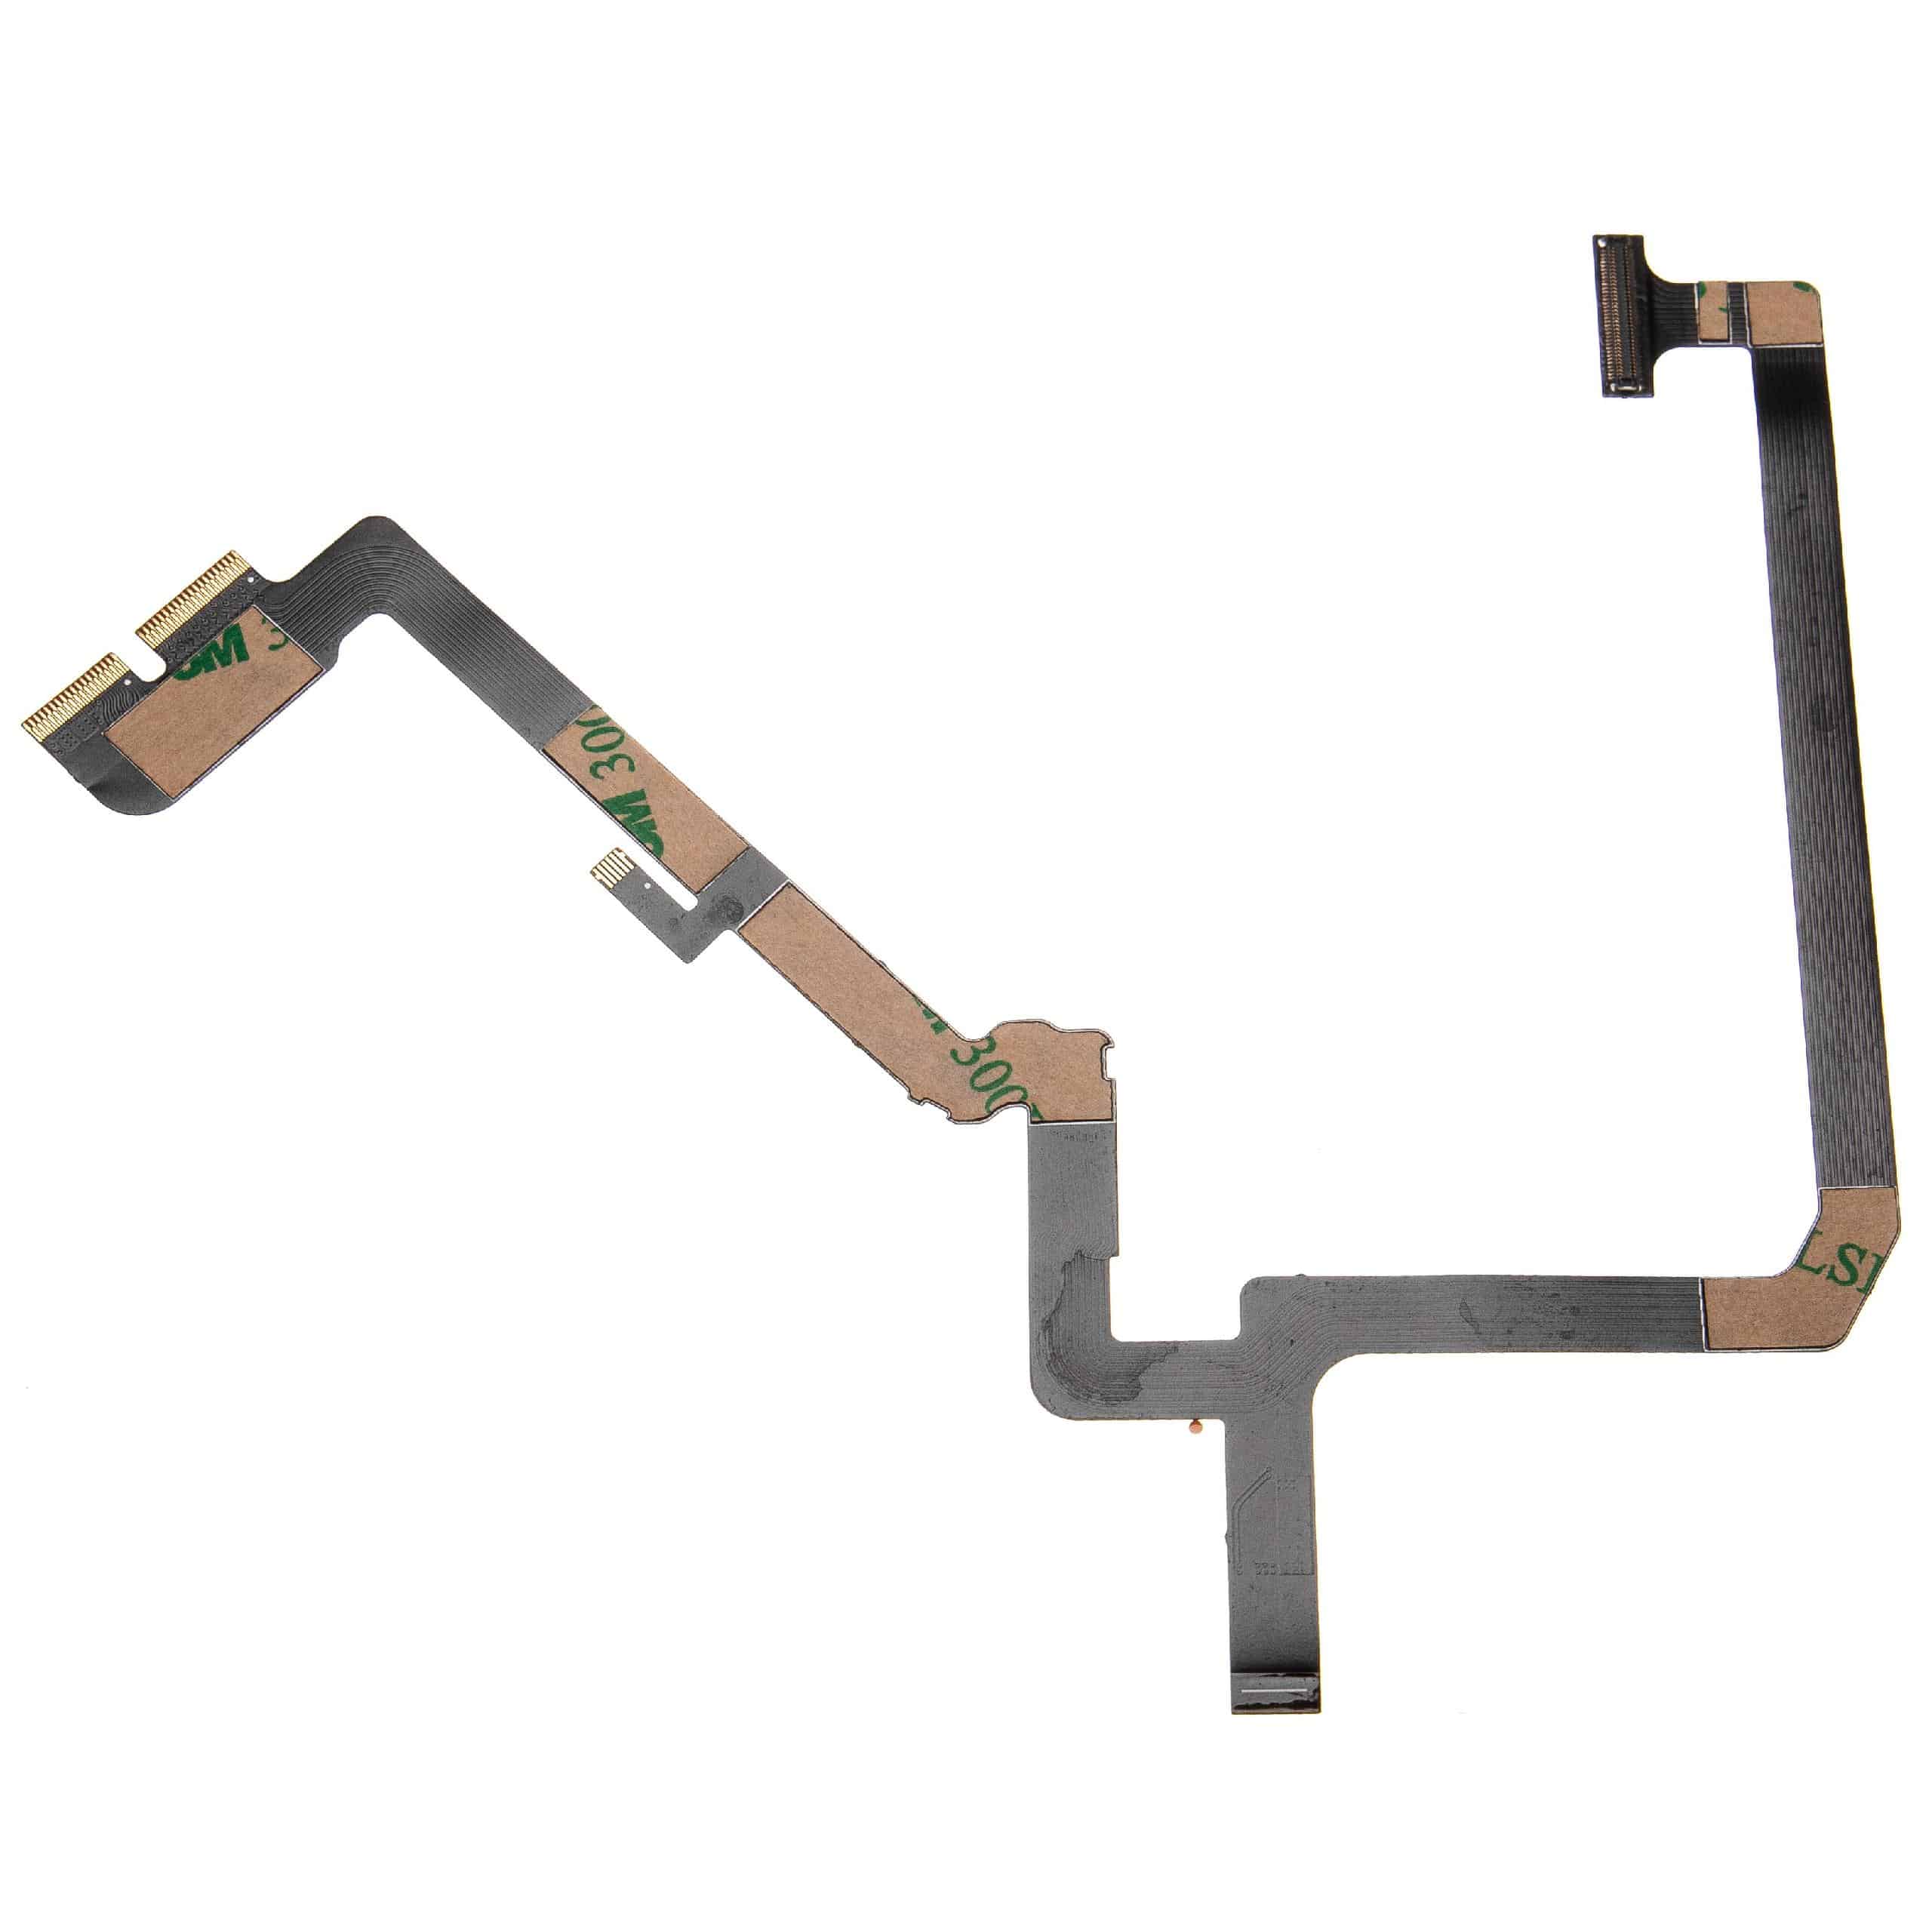 Ribbon Flex Cable suitable for DJI Phantom 4 Pro, 4 Pro+ Drone, Gimbal - with double-sided tape